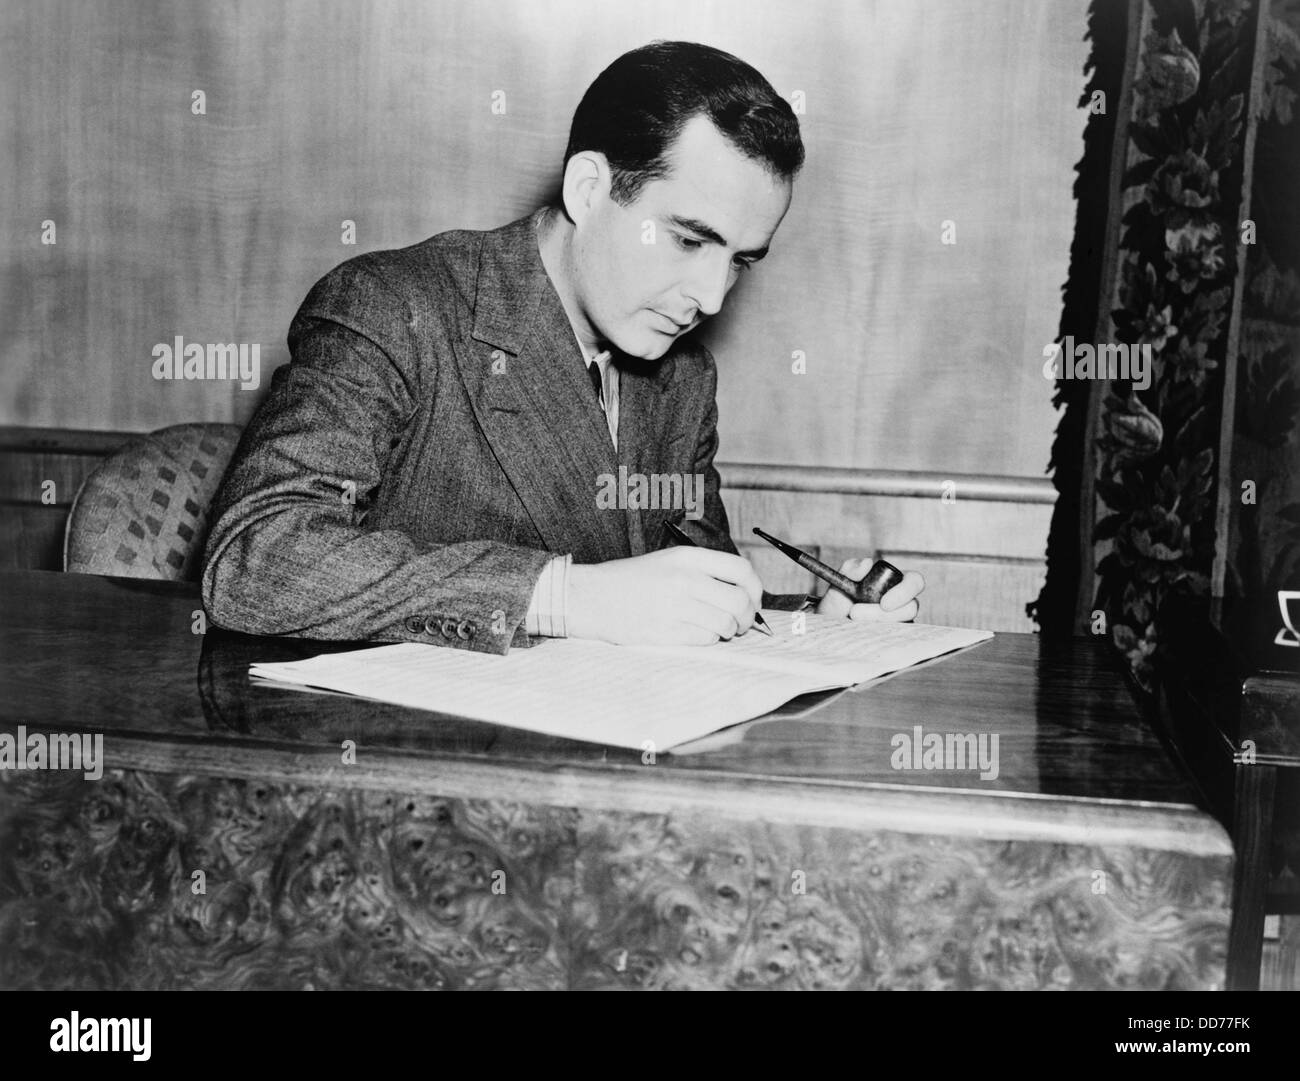 Samuel Barber, American composer of orchestral, opera, choral, and piano music. Oct 26, 1938. (BSLOC 2013 9 15) Stock Photo